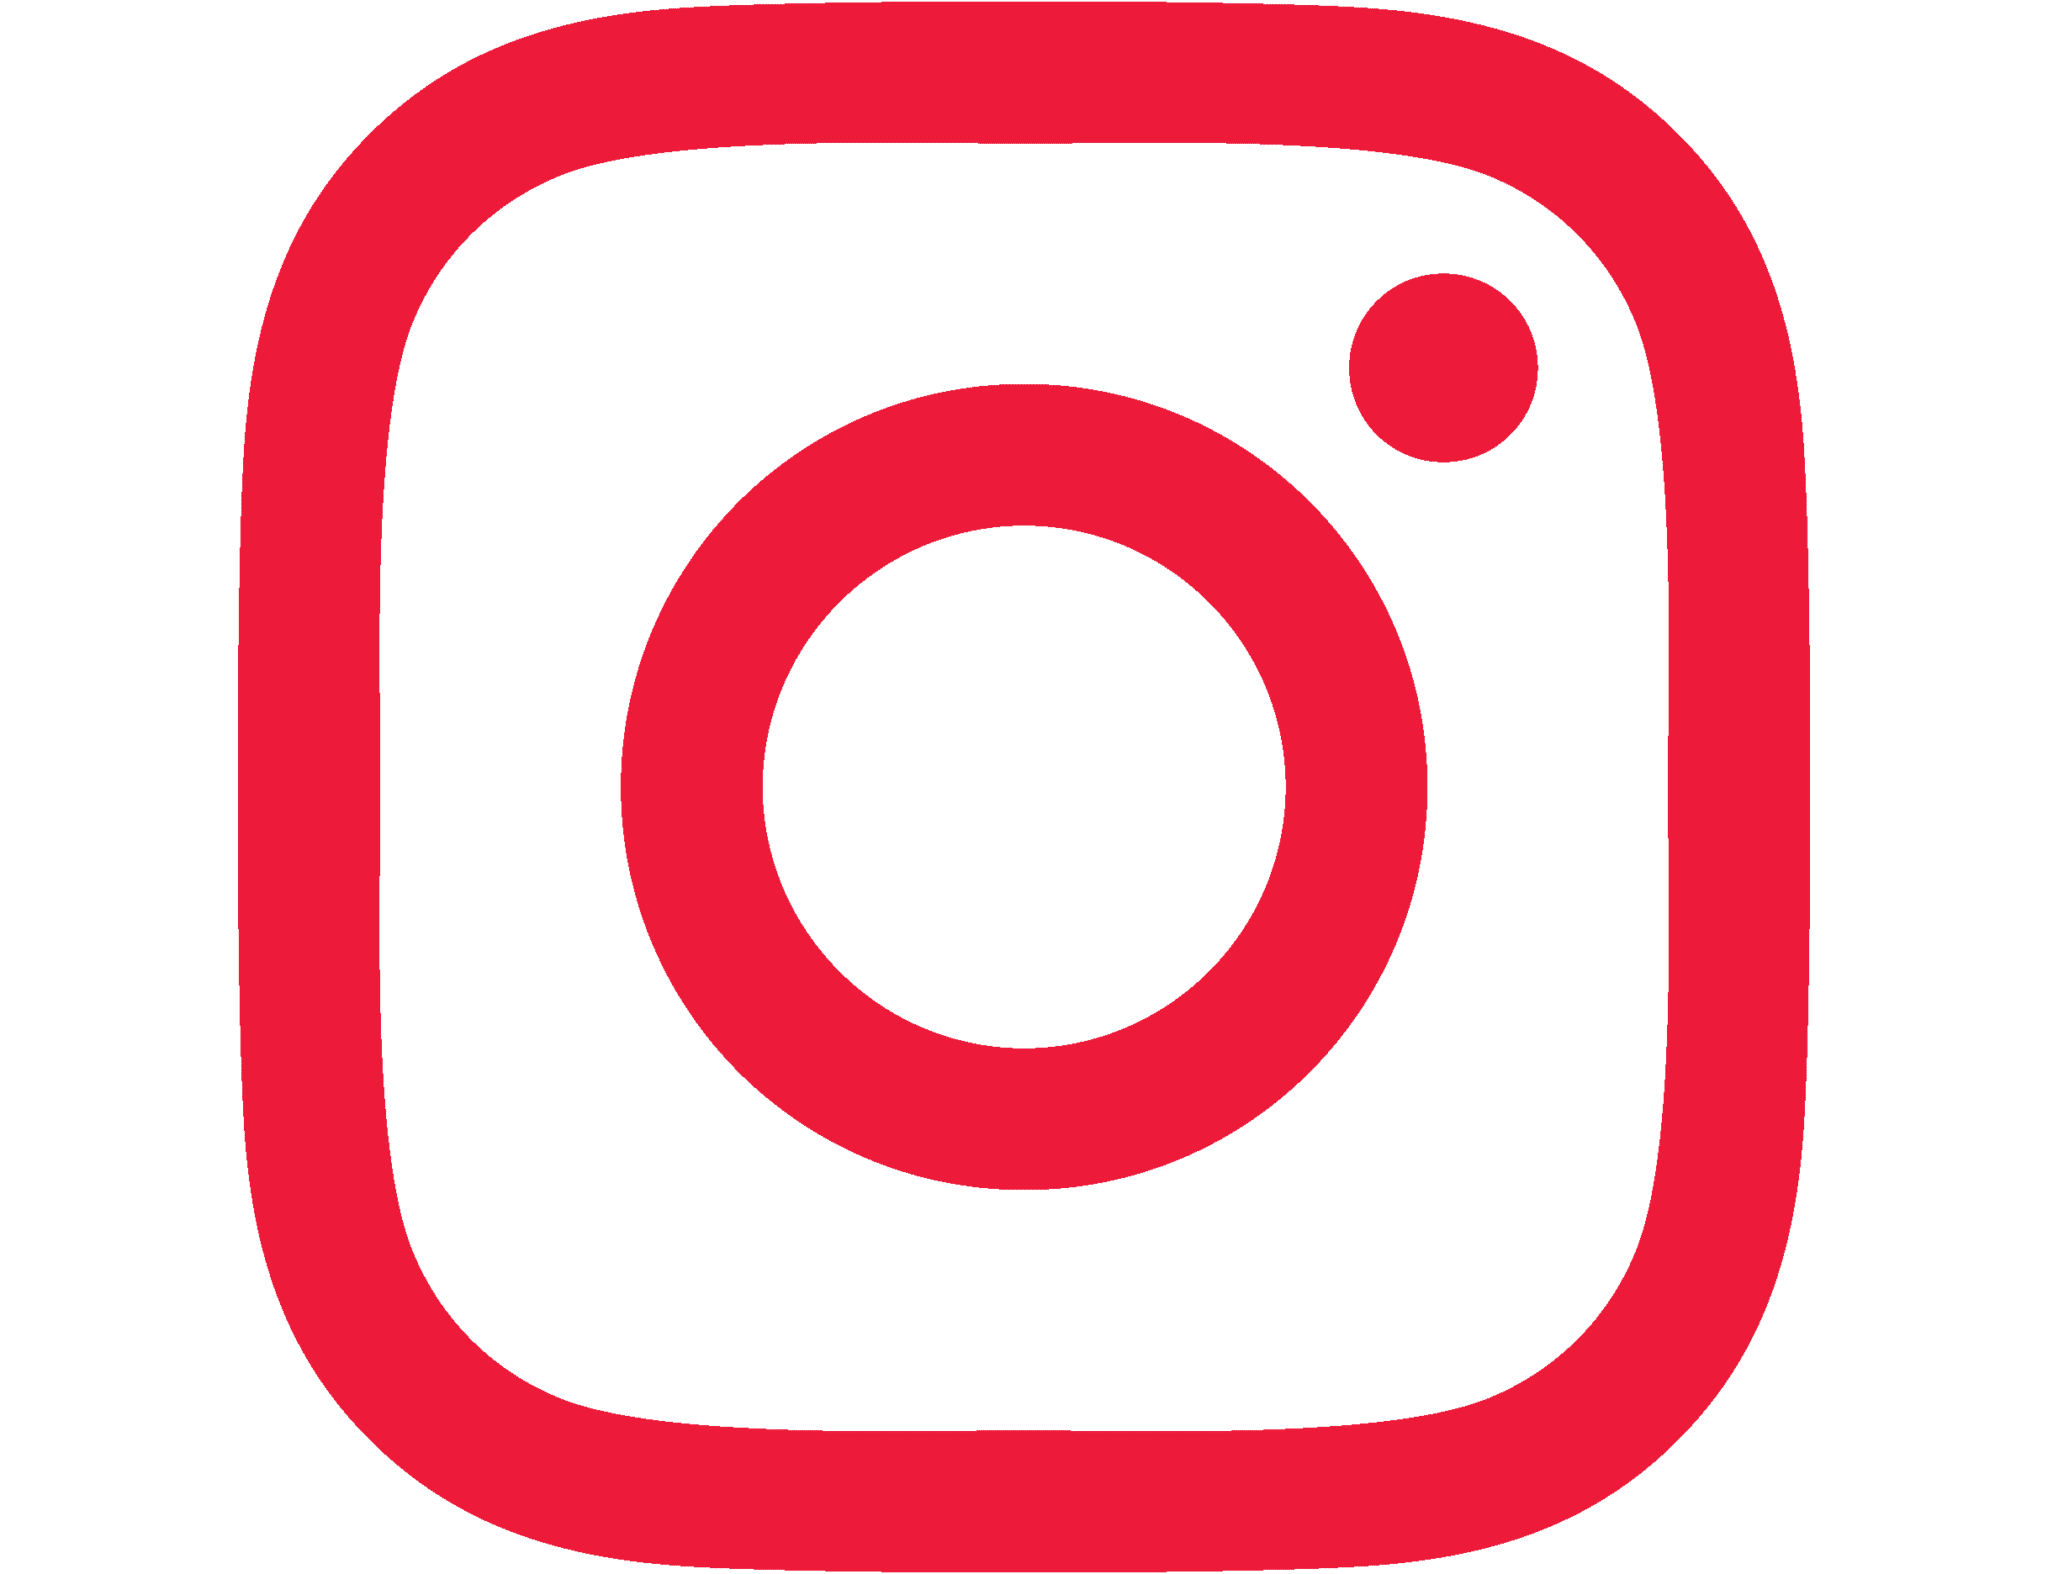 Instagram Icon Red